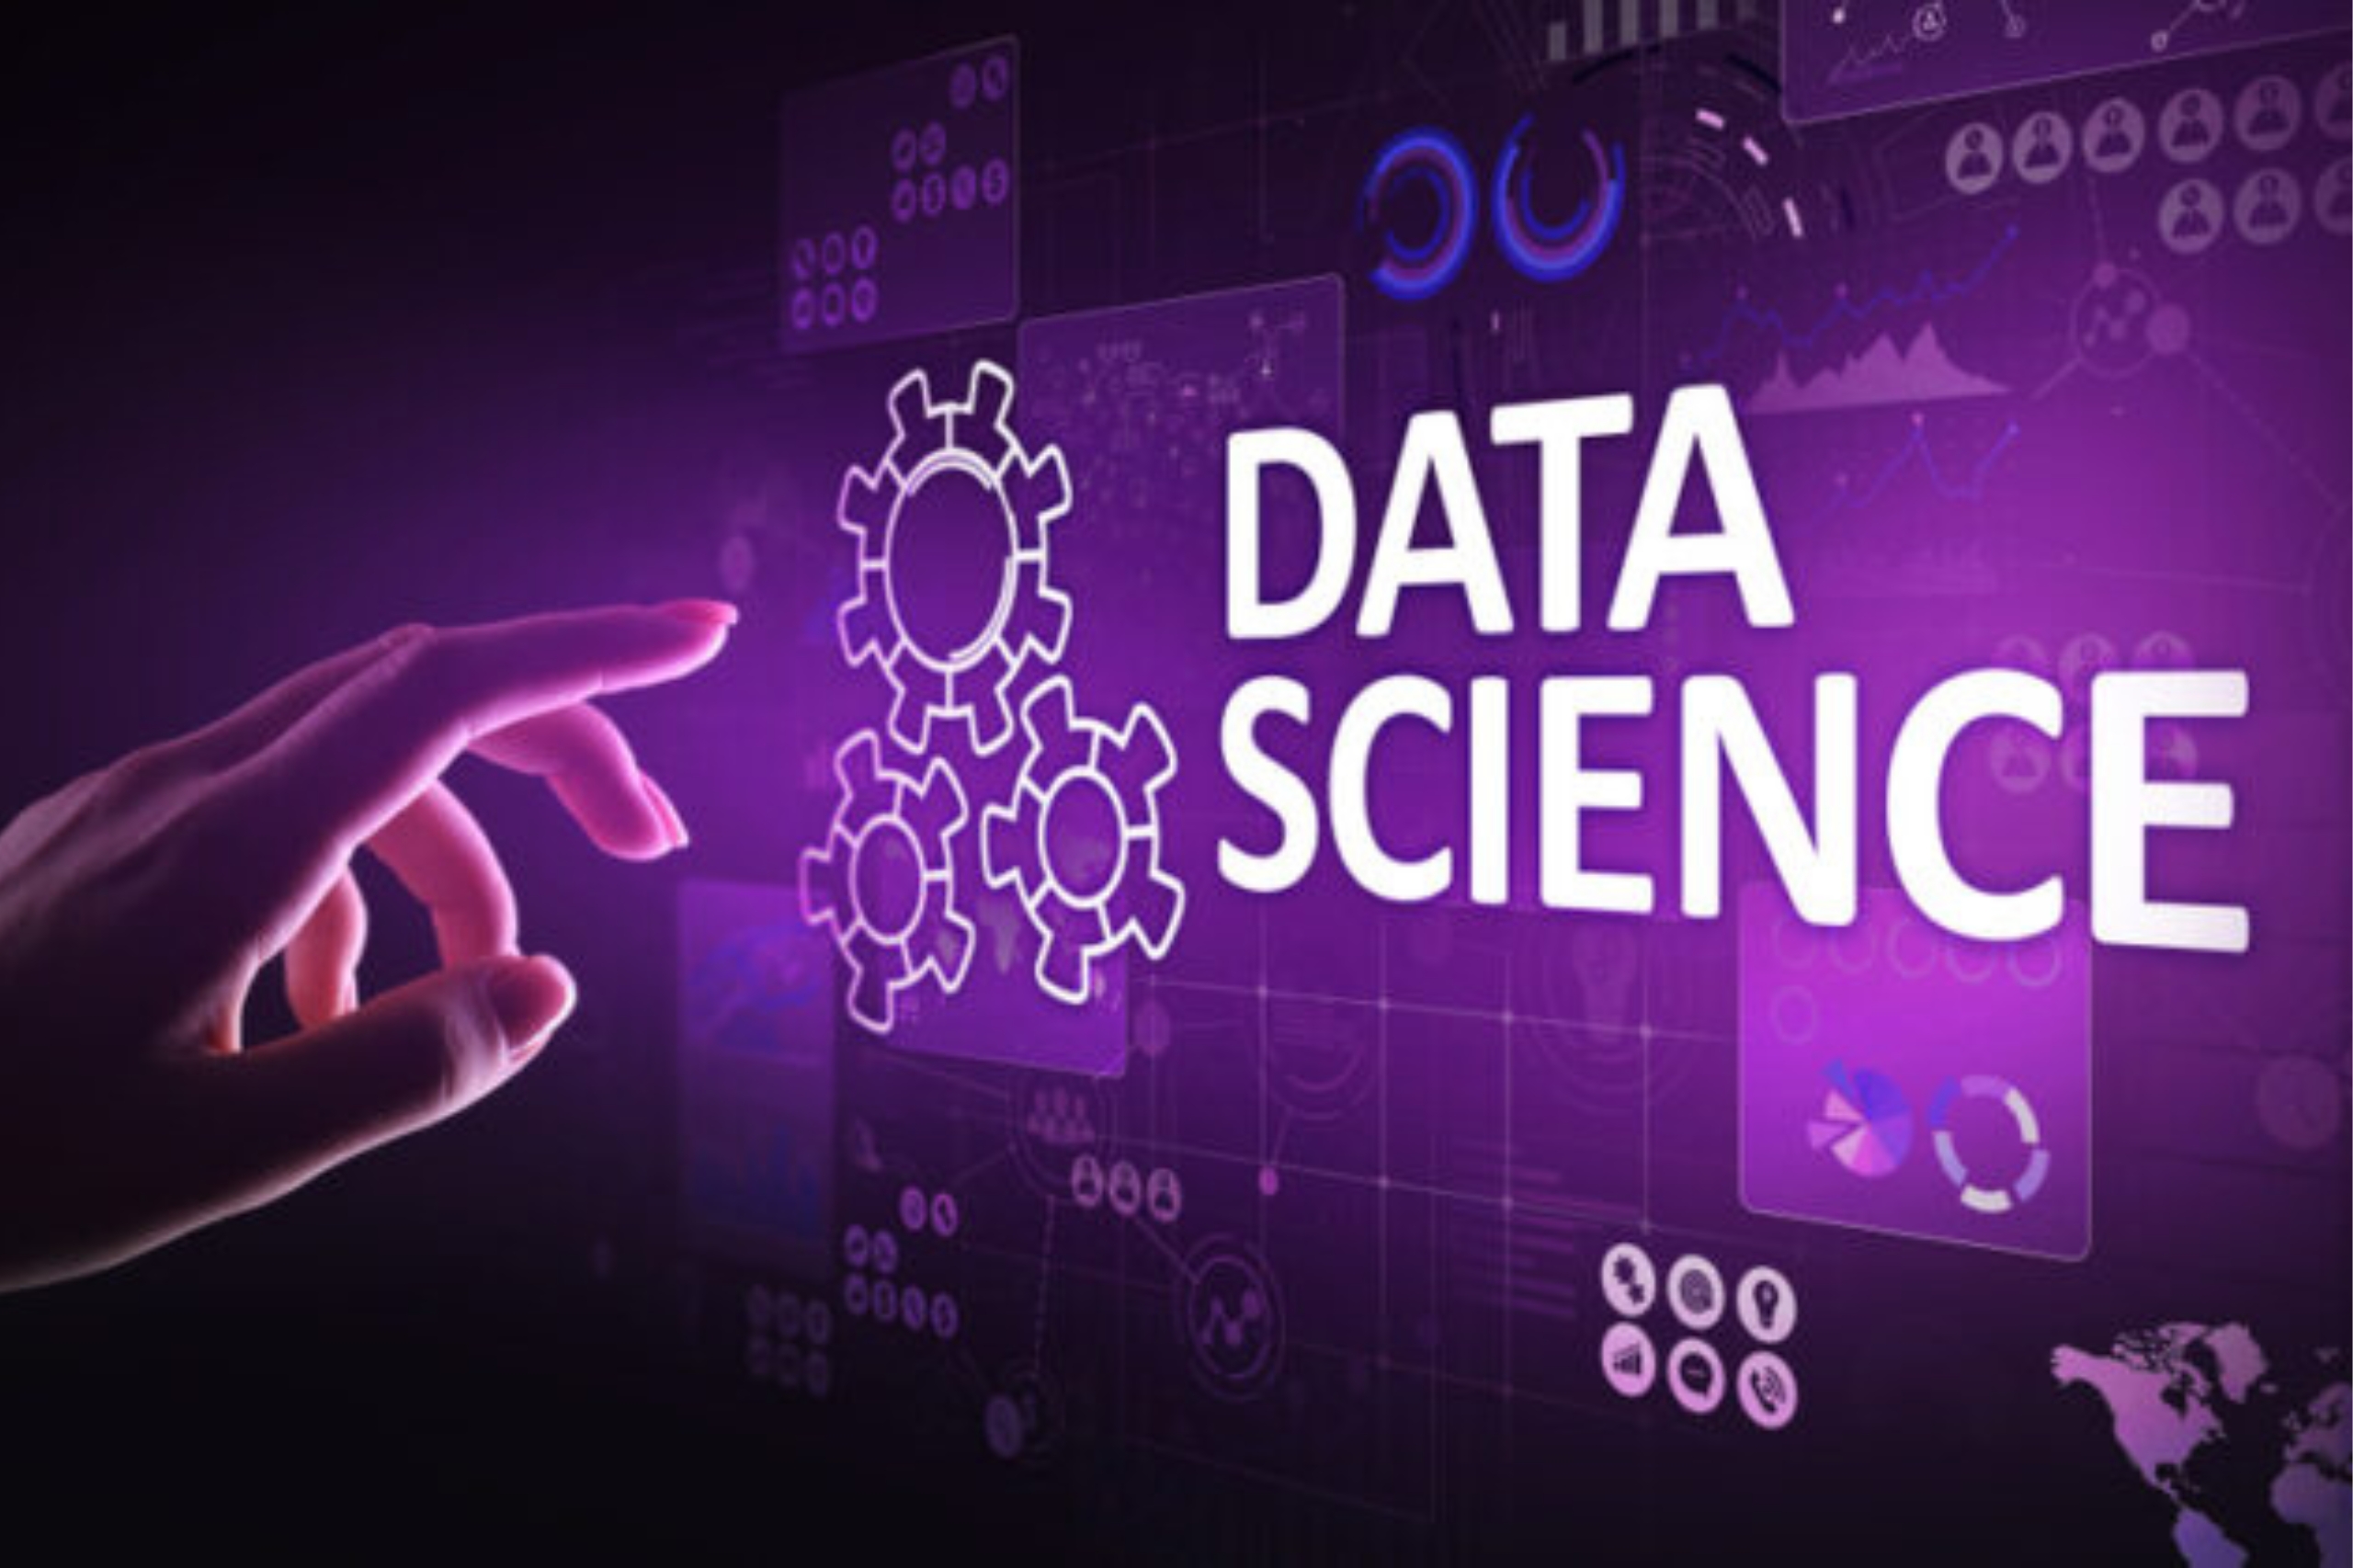 Want To Test Your Proficiency in Data Science